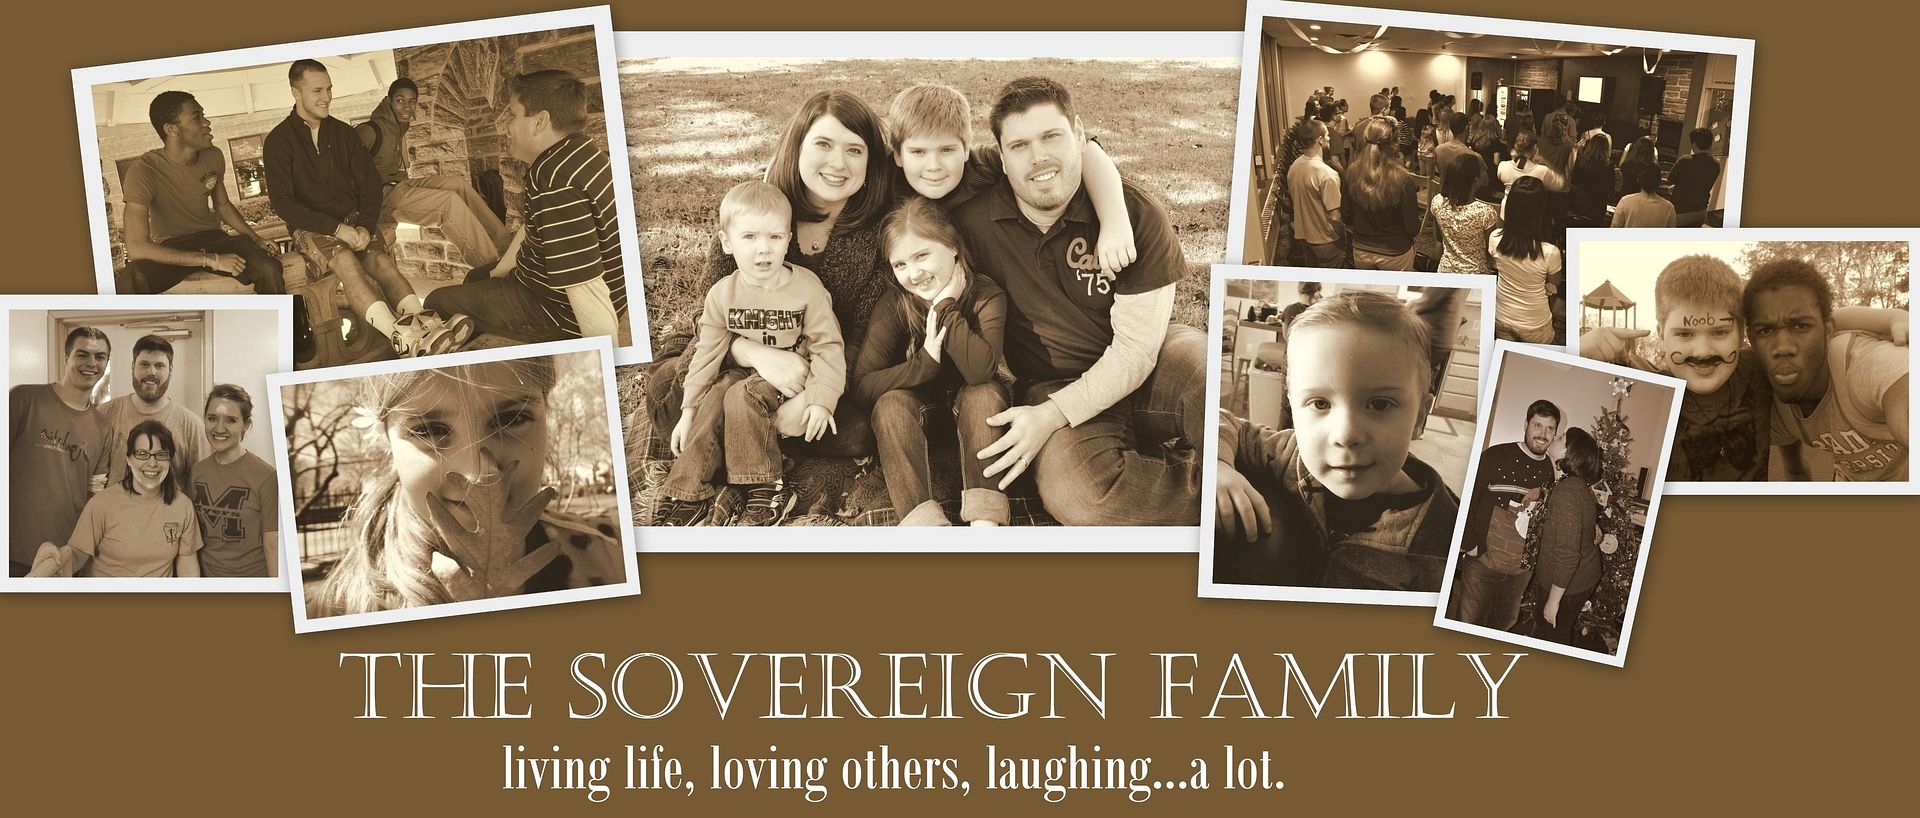 The Sovereign Family